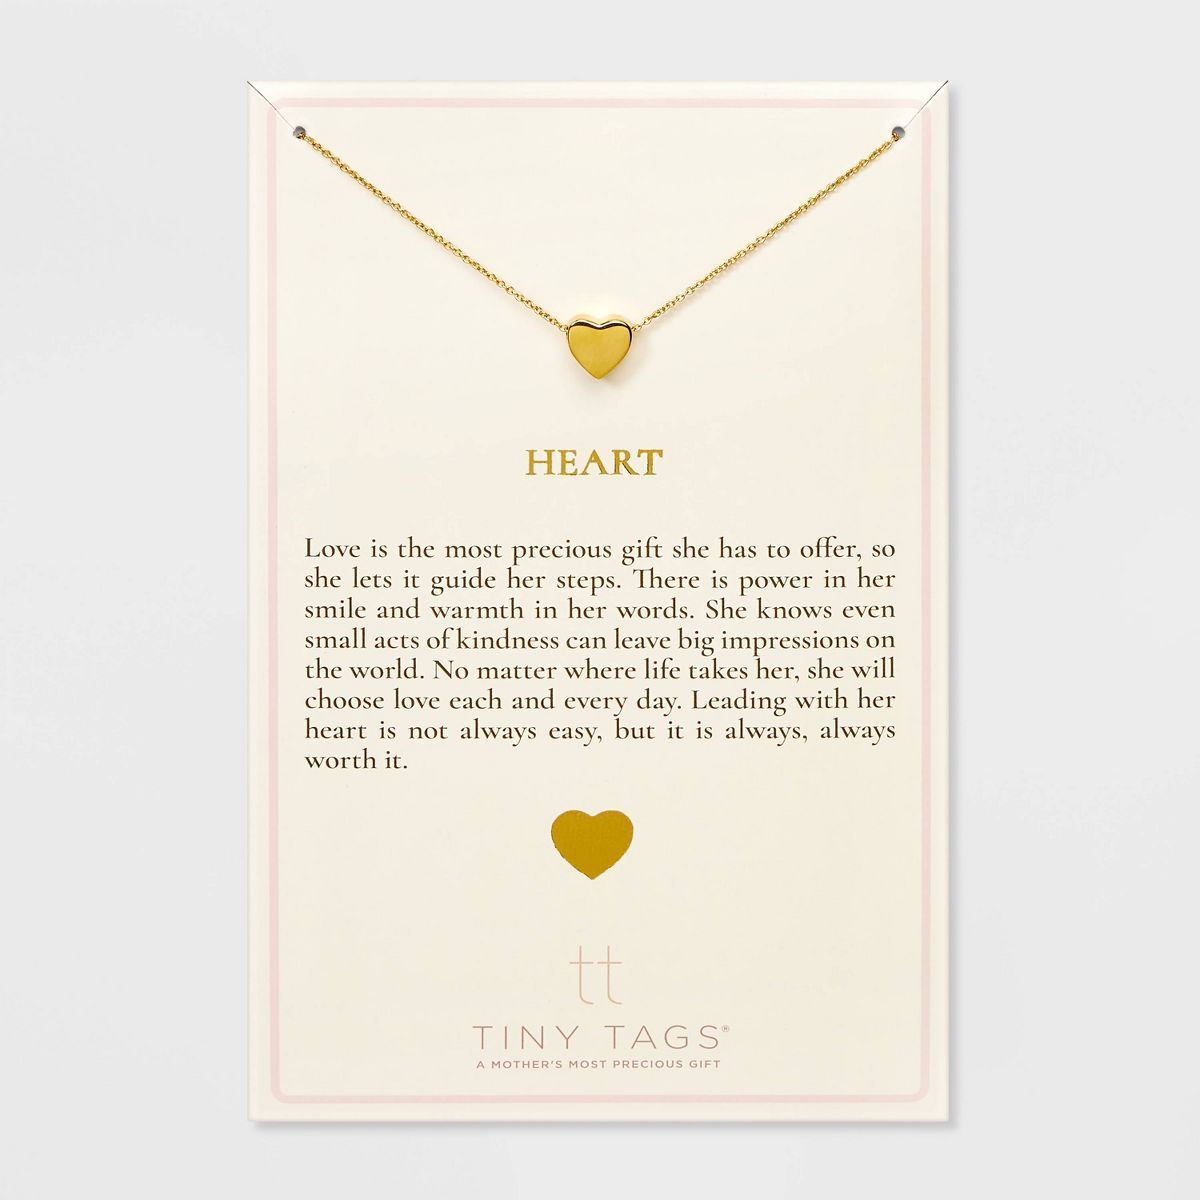 Tiny Tags 14K Gold Ion Plated Heart Chain Necklace - Gold | Target